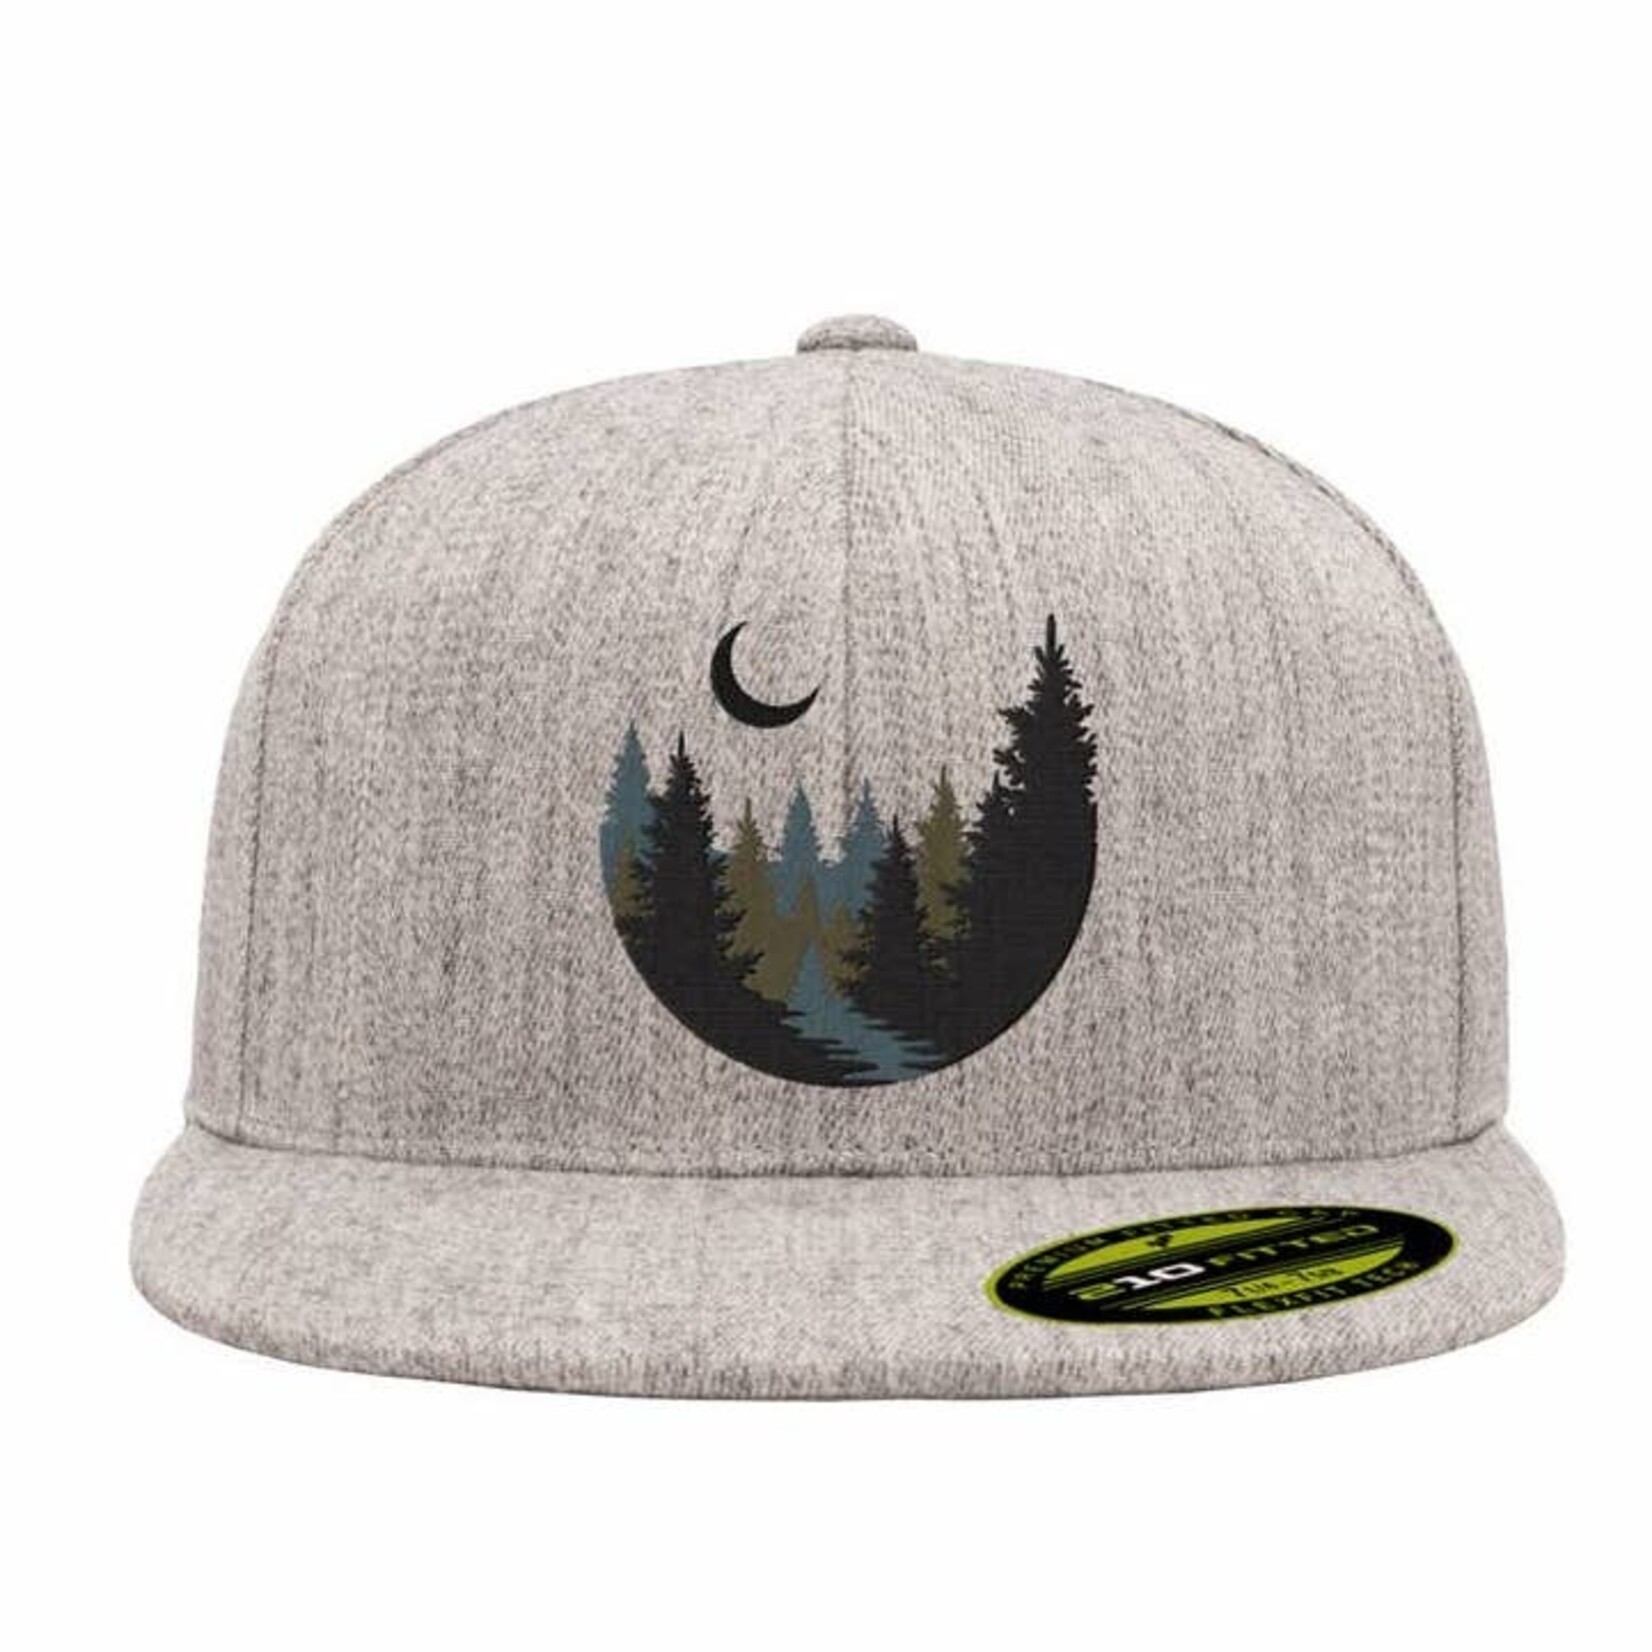 Hats Forest Moon Hat